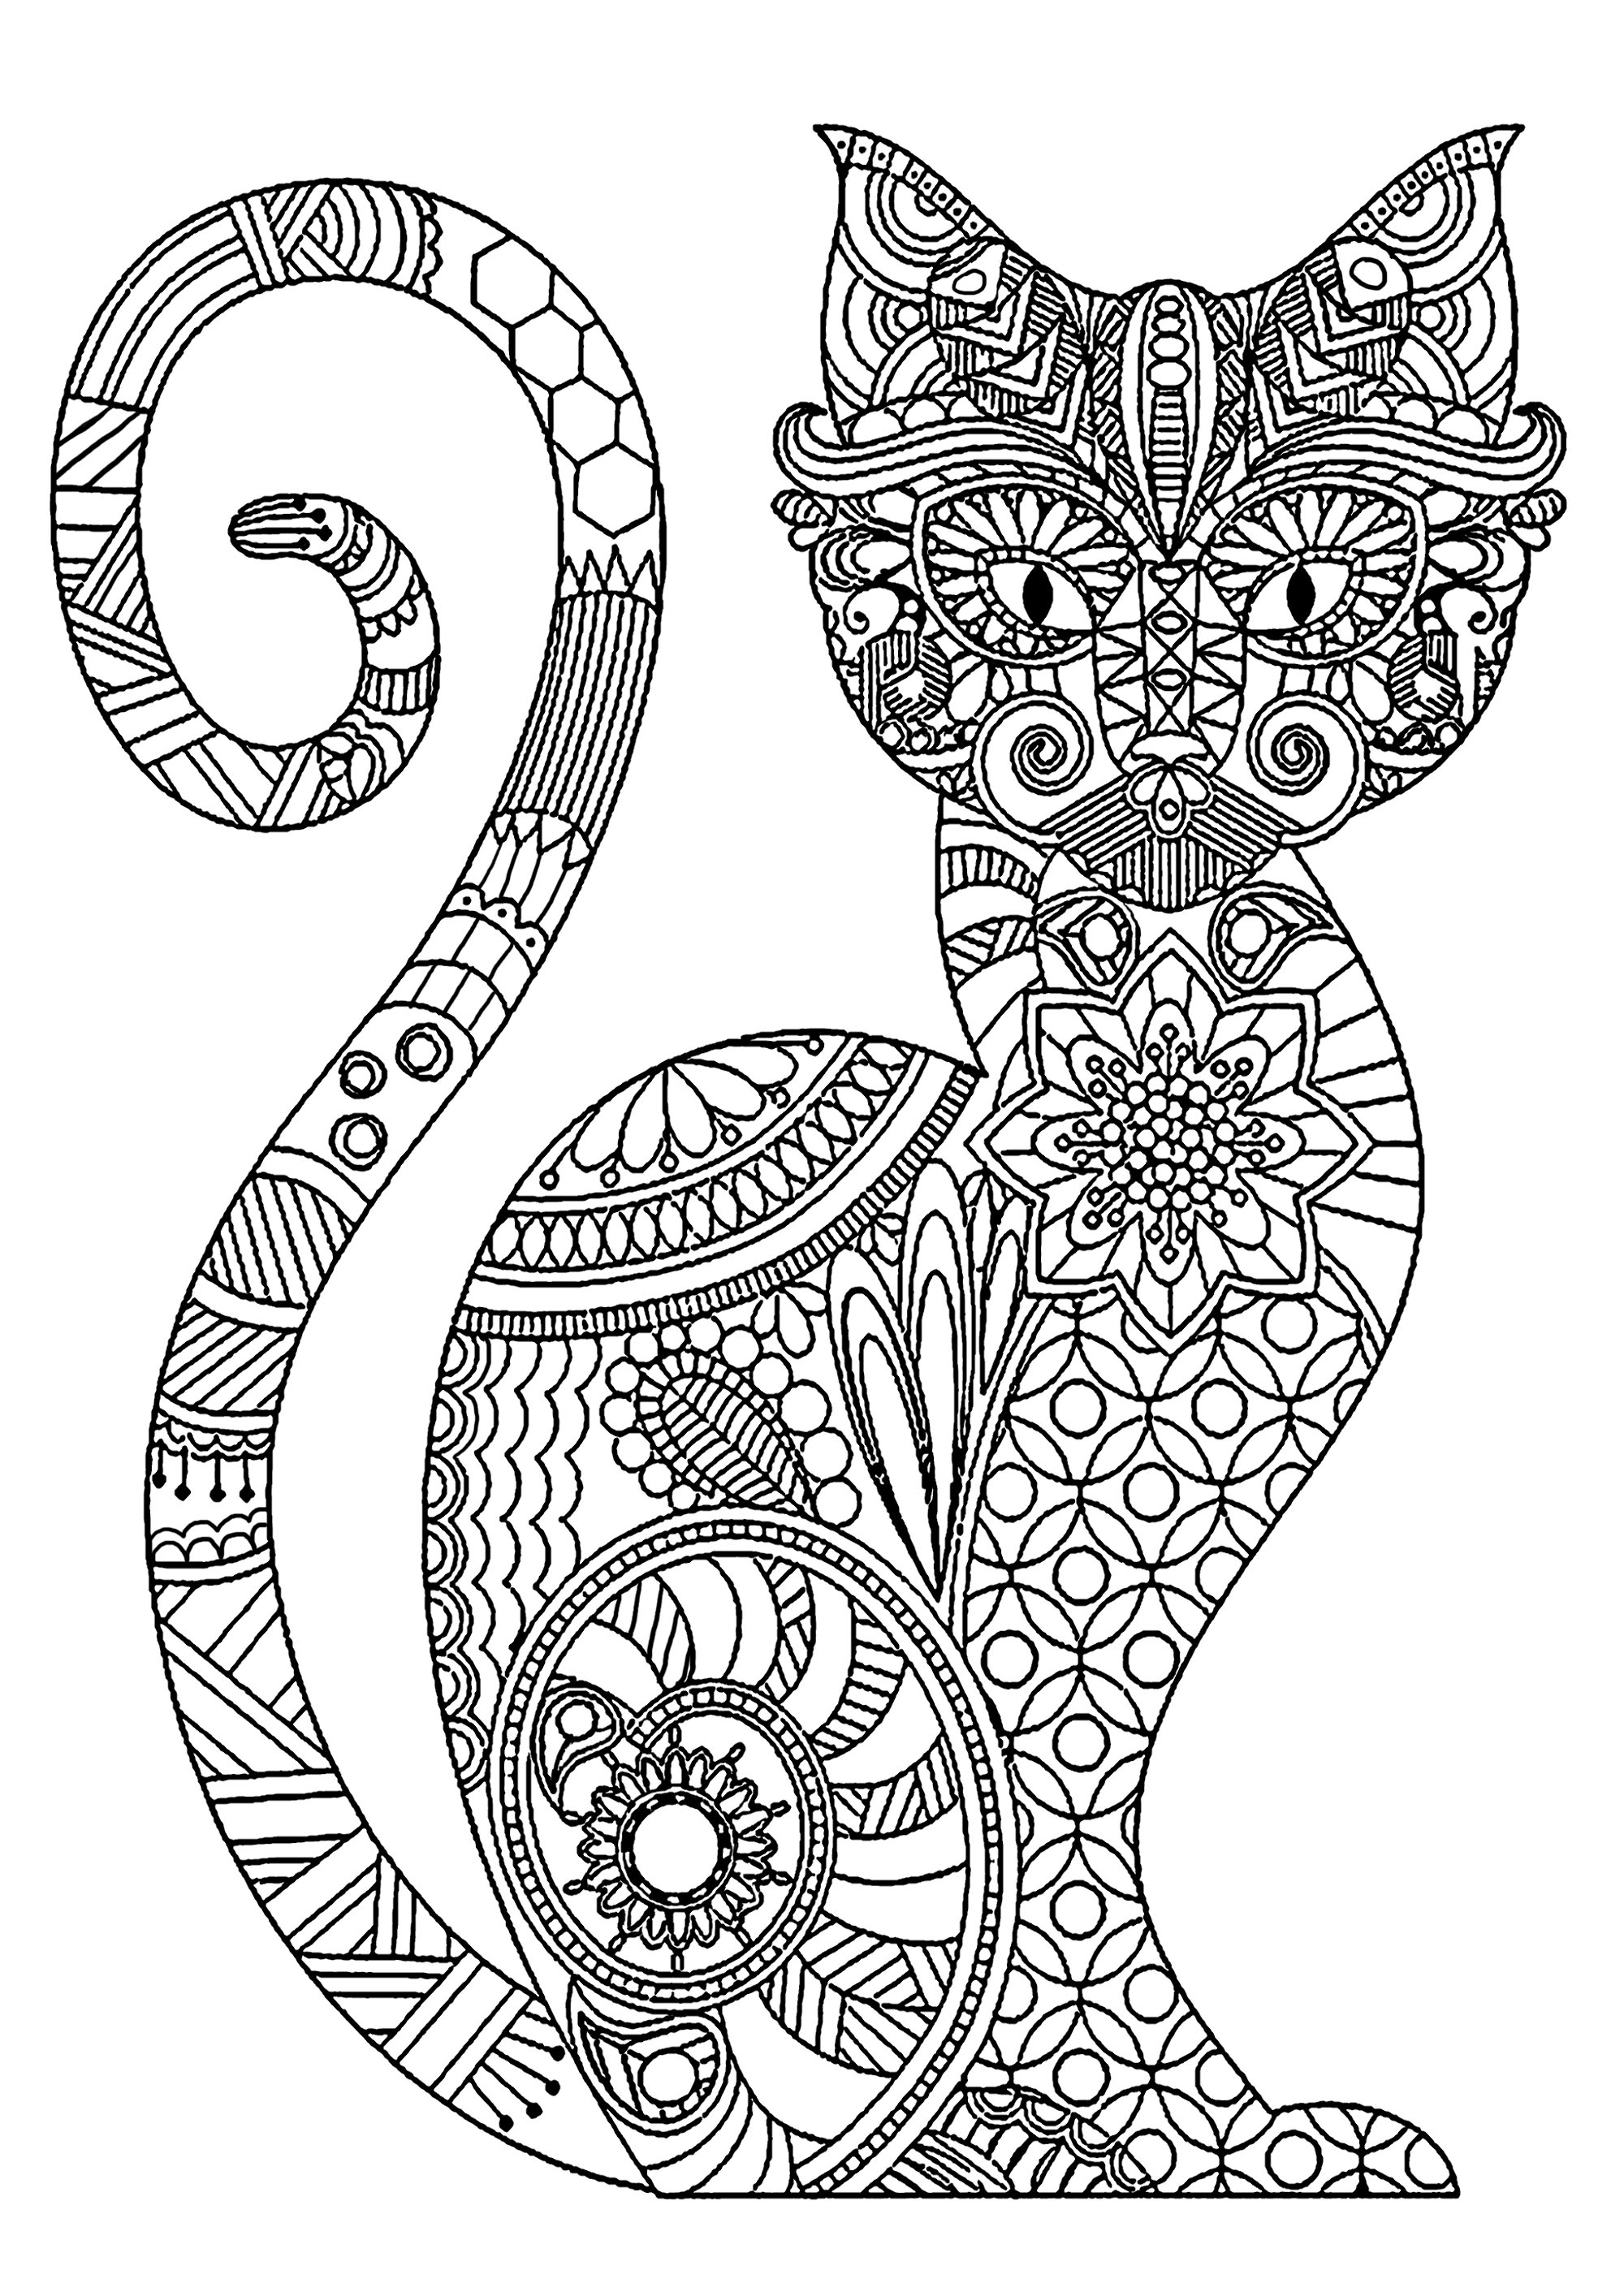 Download Elegant cat with complex patterns - Cats Adult Coloring Pages